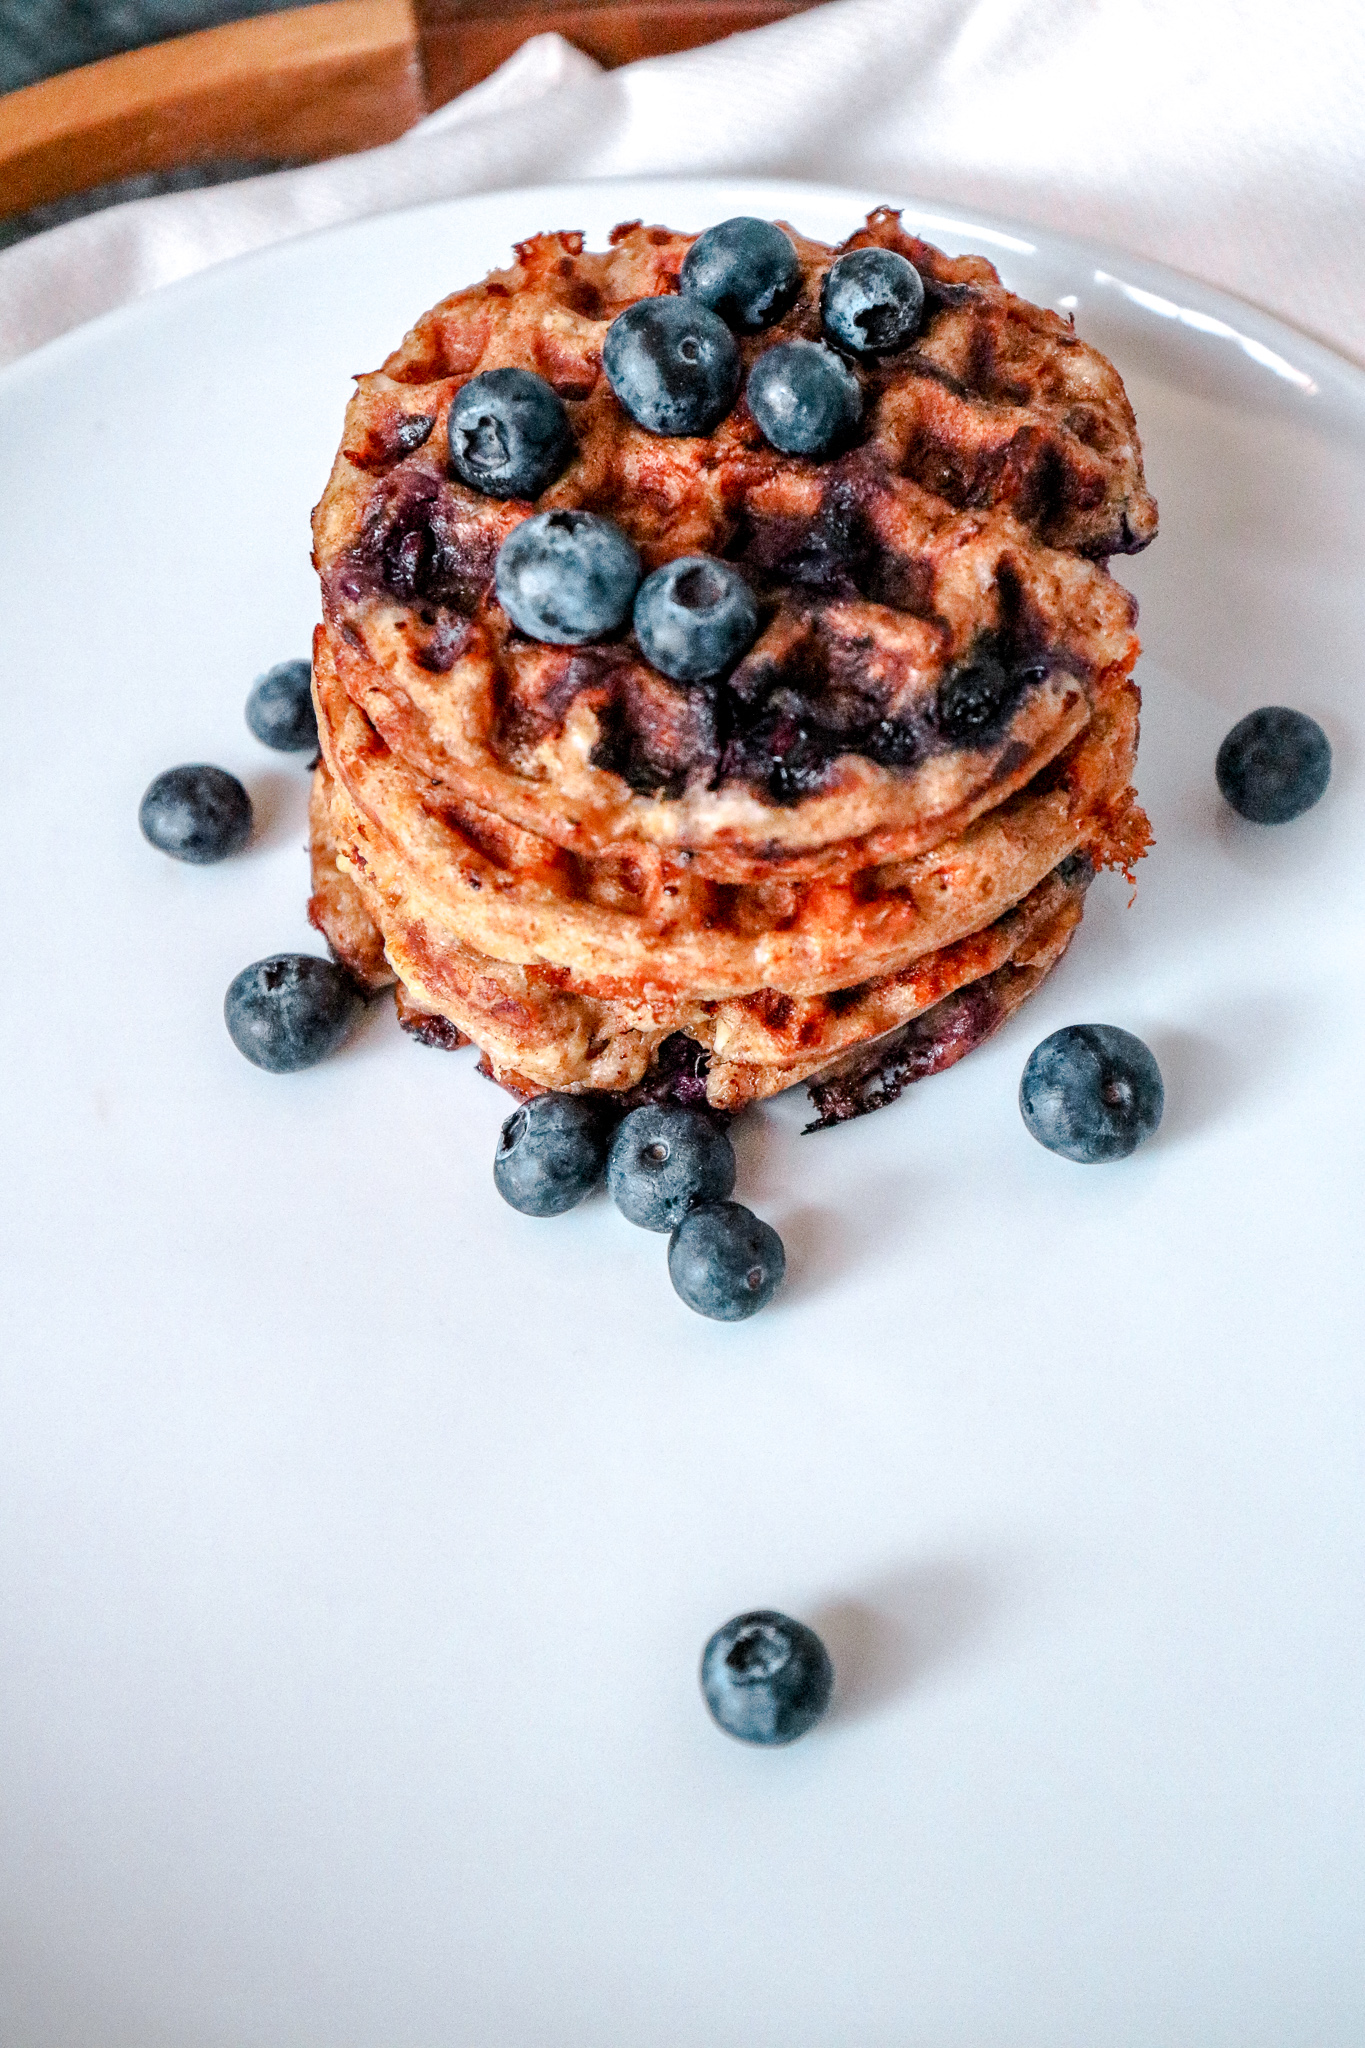 A white plate with four mini chaffles stacked on top of it with blueberries on top and sprinkled on the plate.